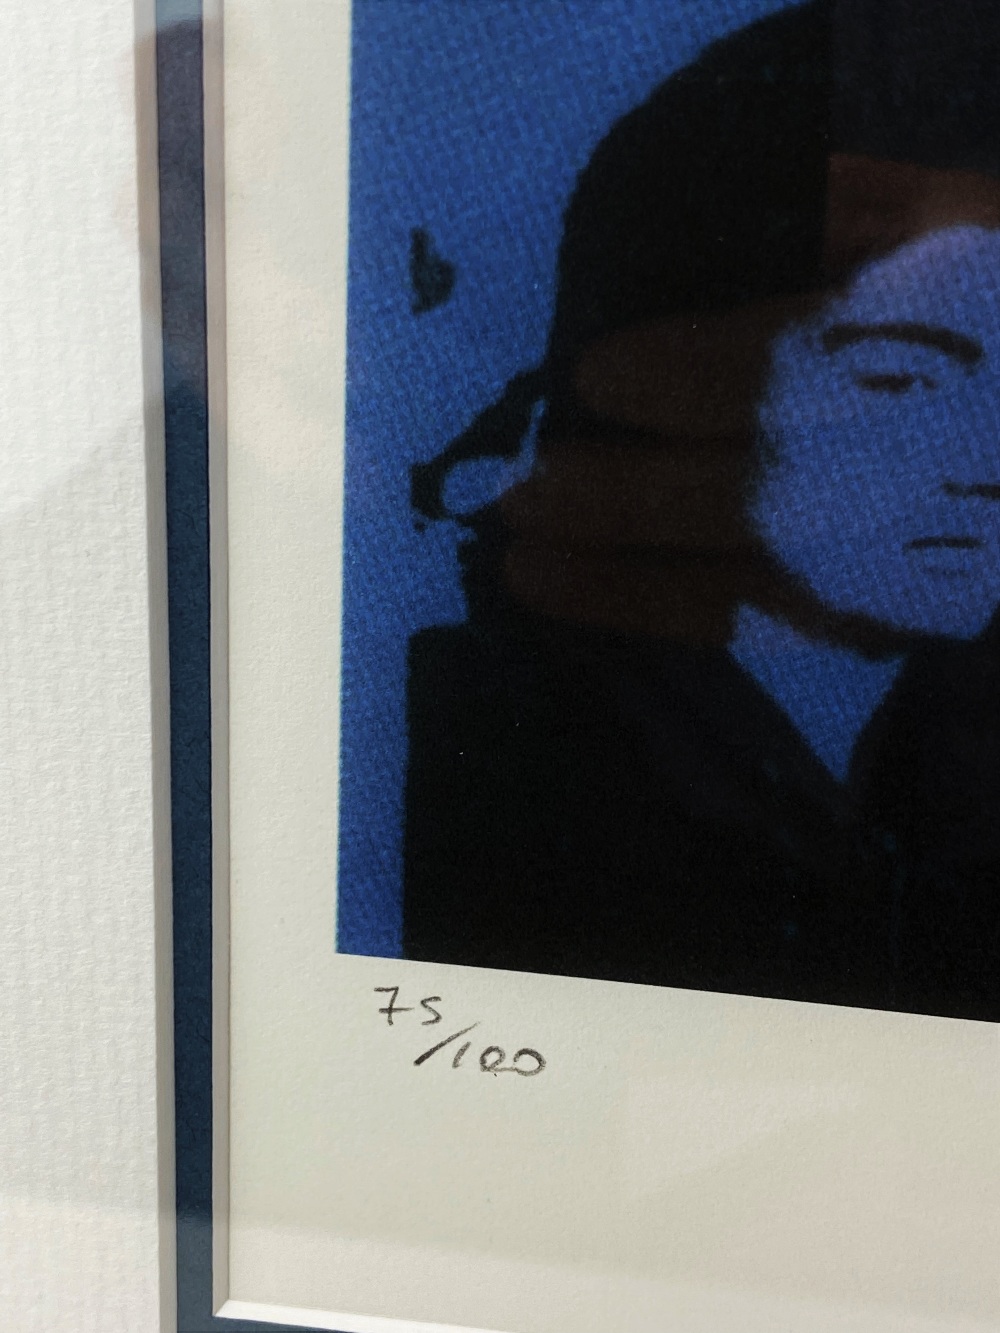 Andy Warhol (1928-1987) “Jackie Kennedy ” Numbered #75/100 Lithograph, Ornate Framed. - Image 3 of 4